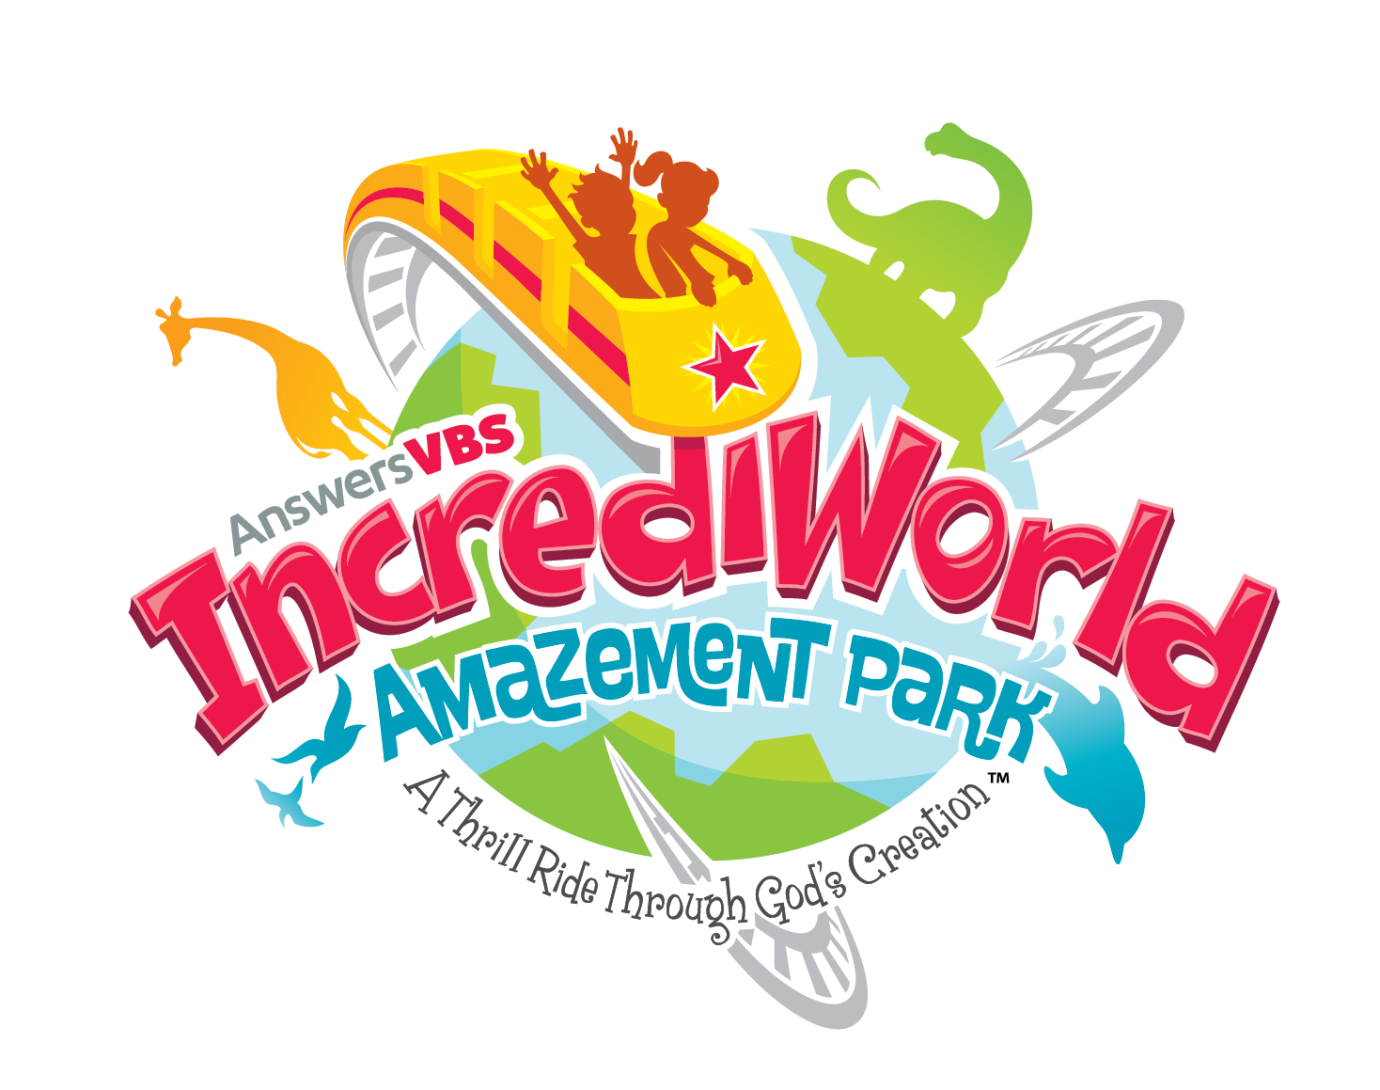 IncrediWorld Amazement Park      (At home VBS)